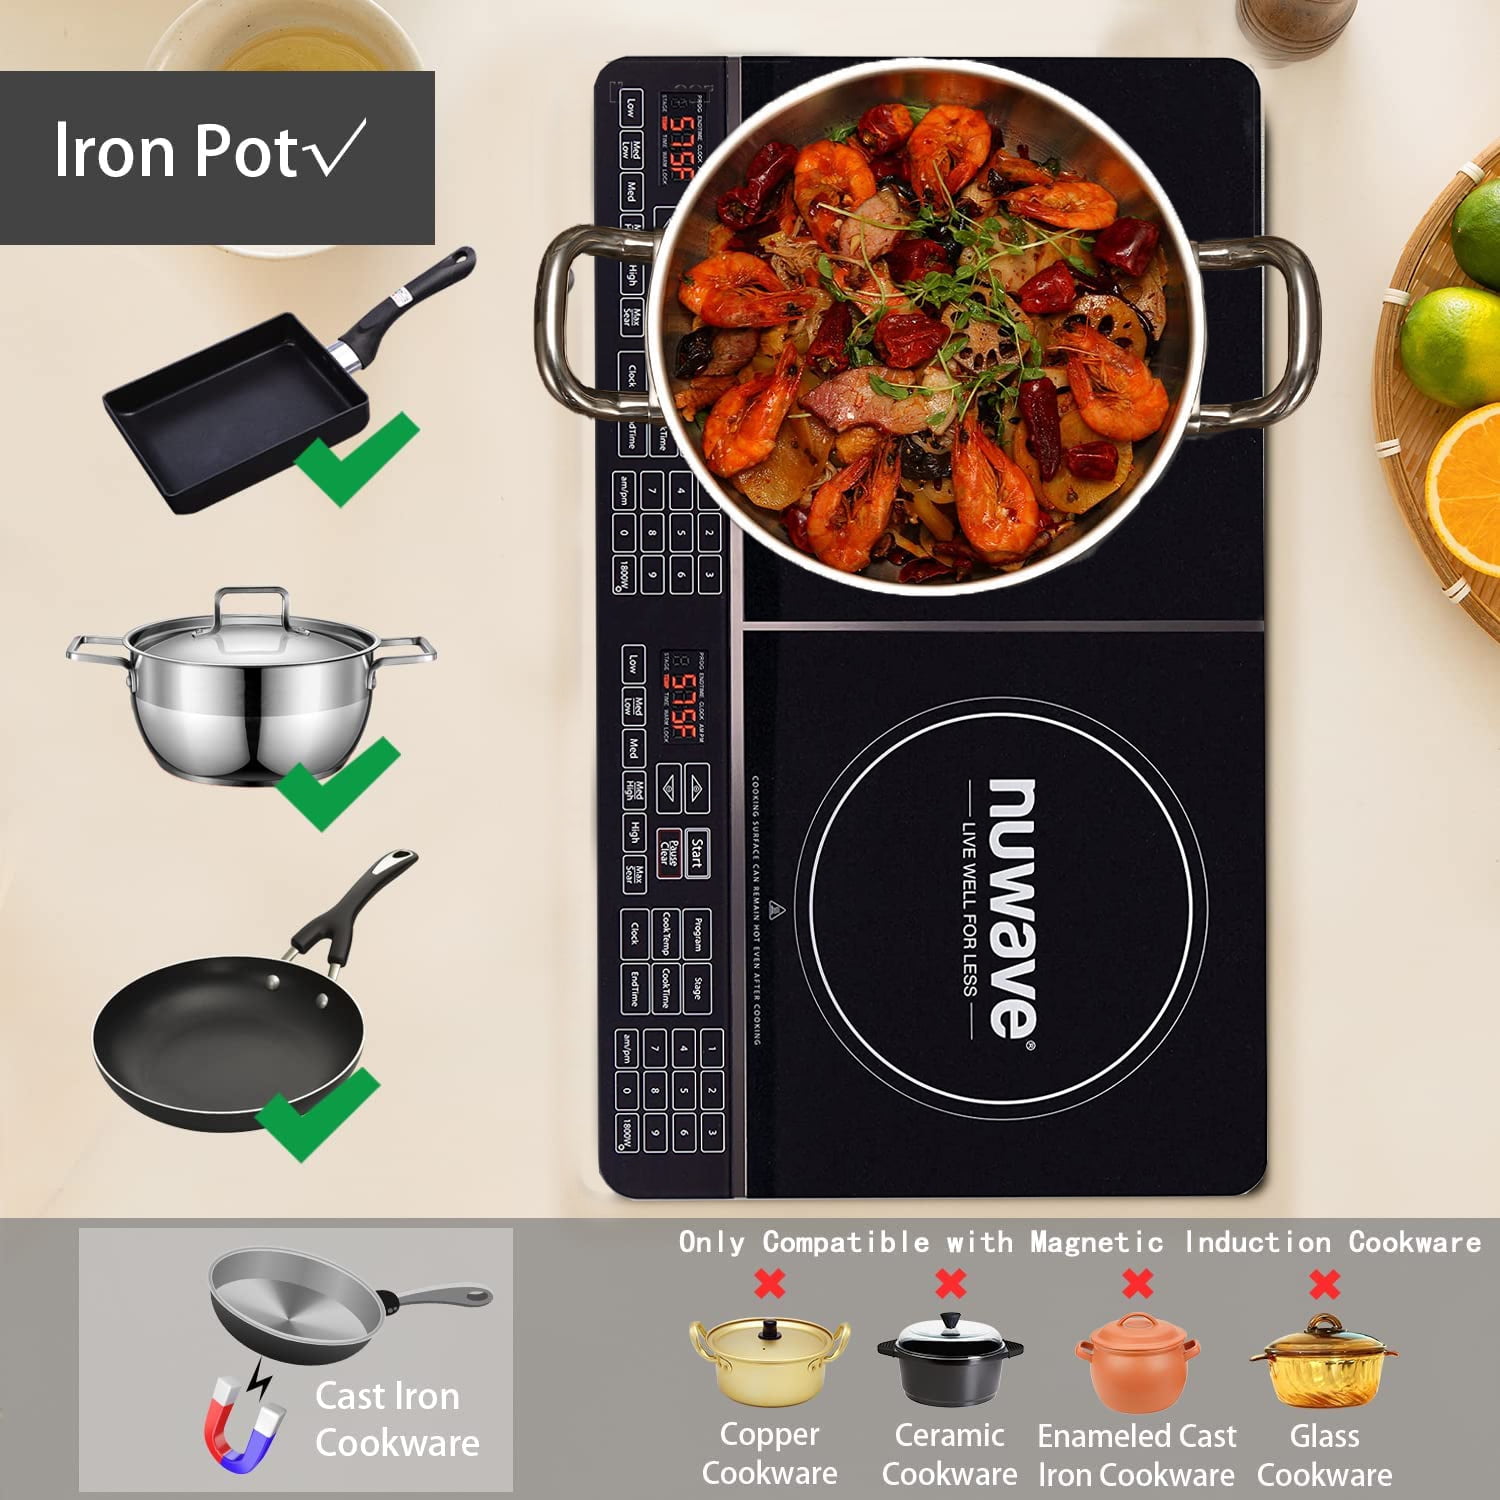 Nuwave Flex Precision Induction Cooktop, Portable, Large 6.5” Heating Coil,  10.25” Shatter-Proof Ceramic Glass, 3 Watt Settings, 4Qt Induction-Ready